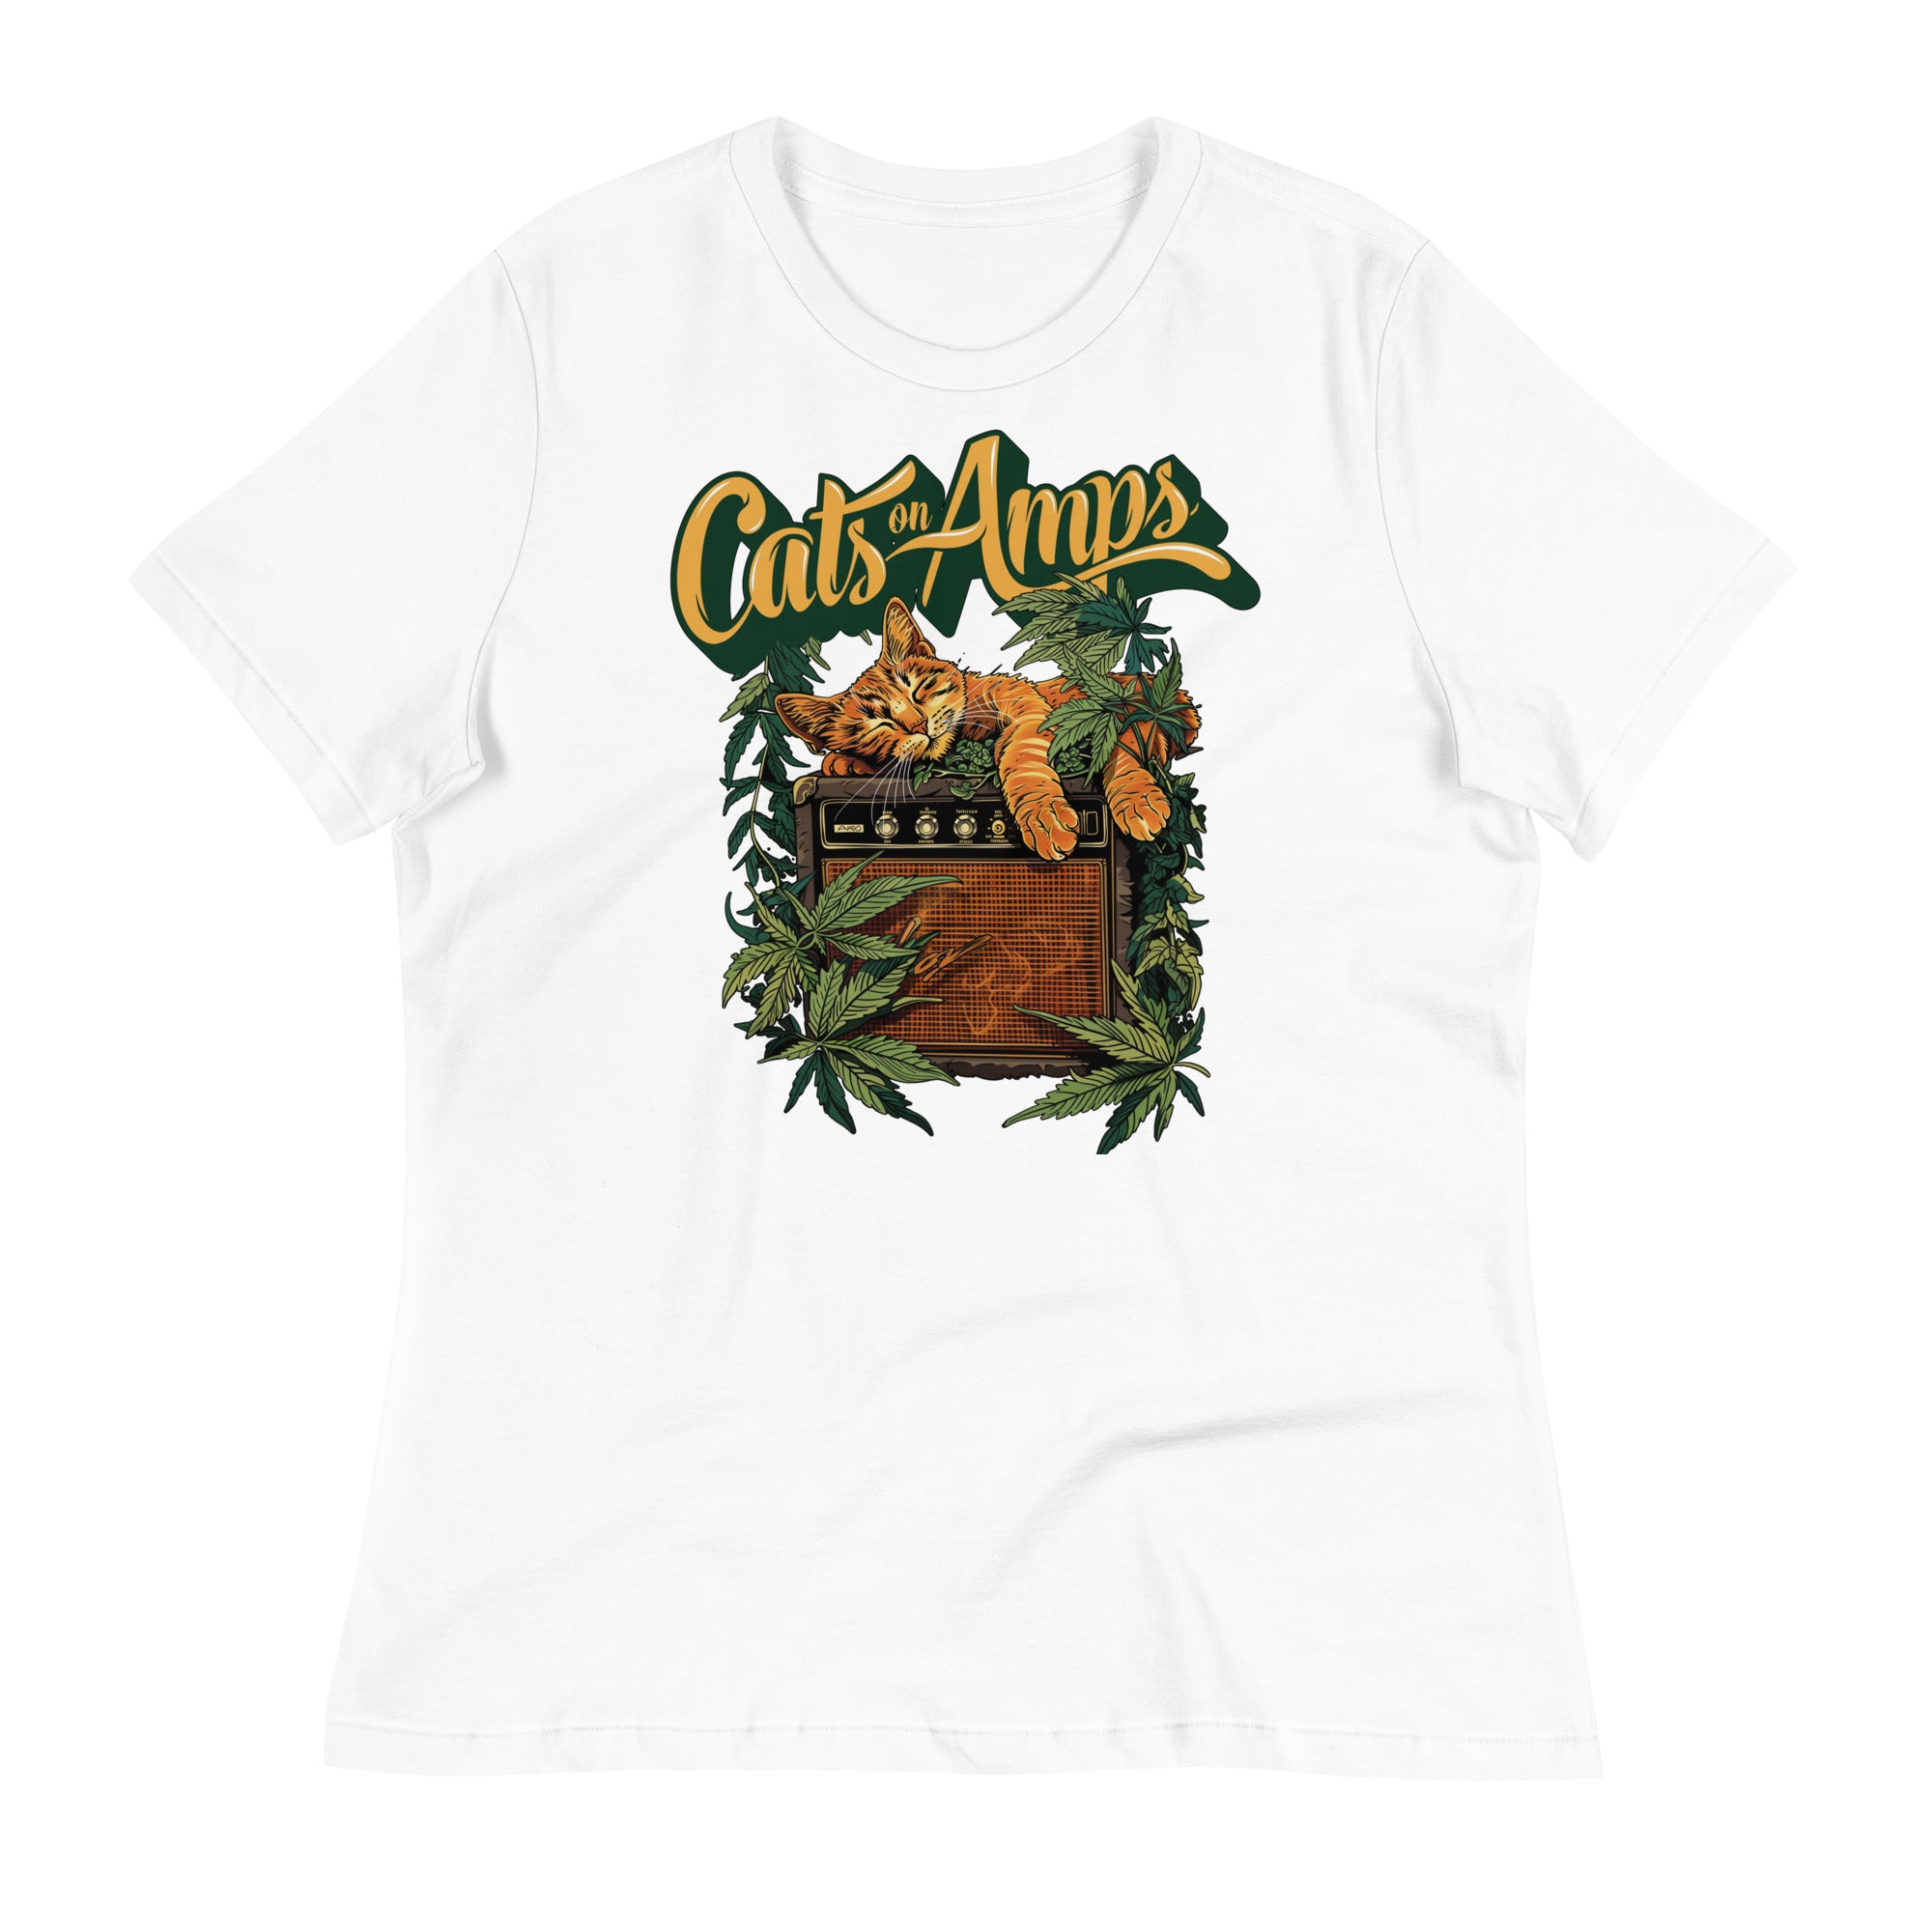 CATS ON AMPS - 420 Sleeper- Women's Relaxed T-Shirt